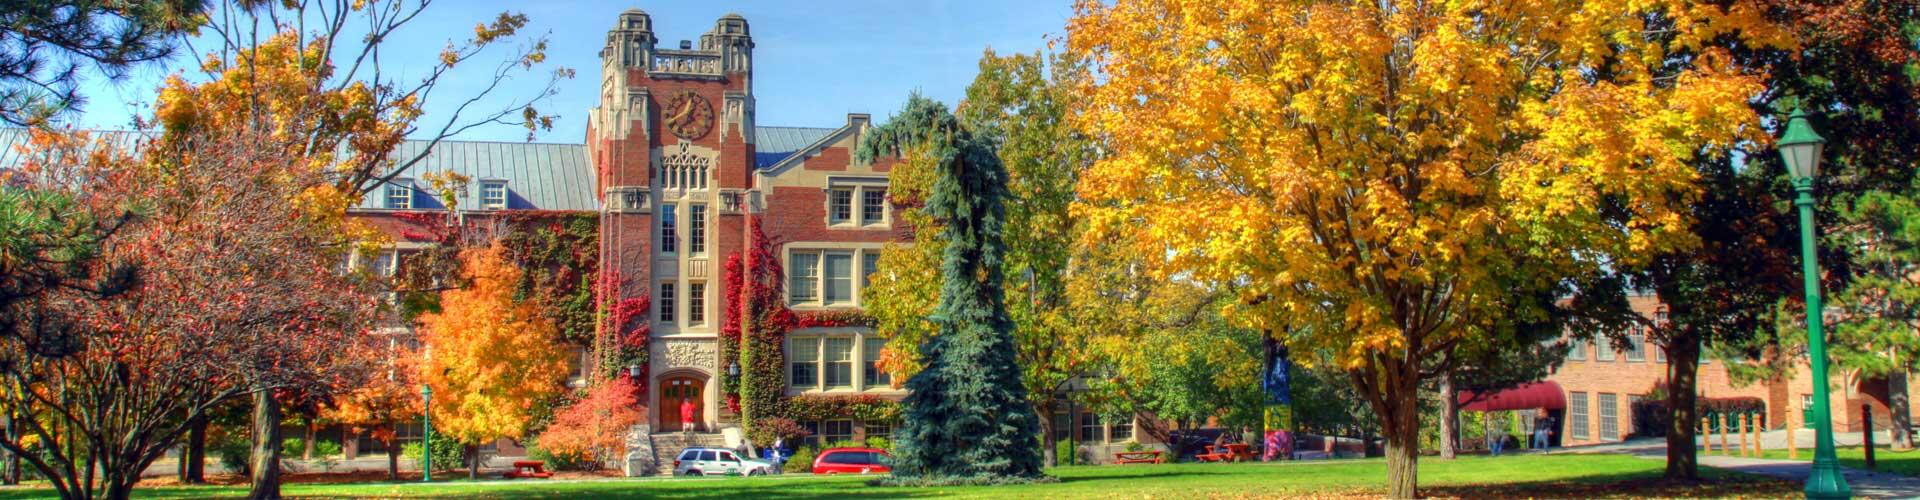 Sturges Hall in fall.